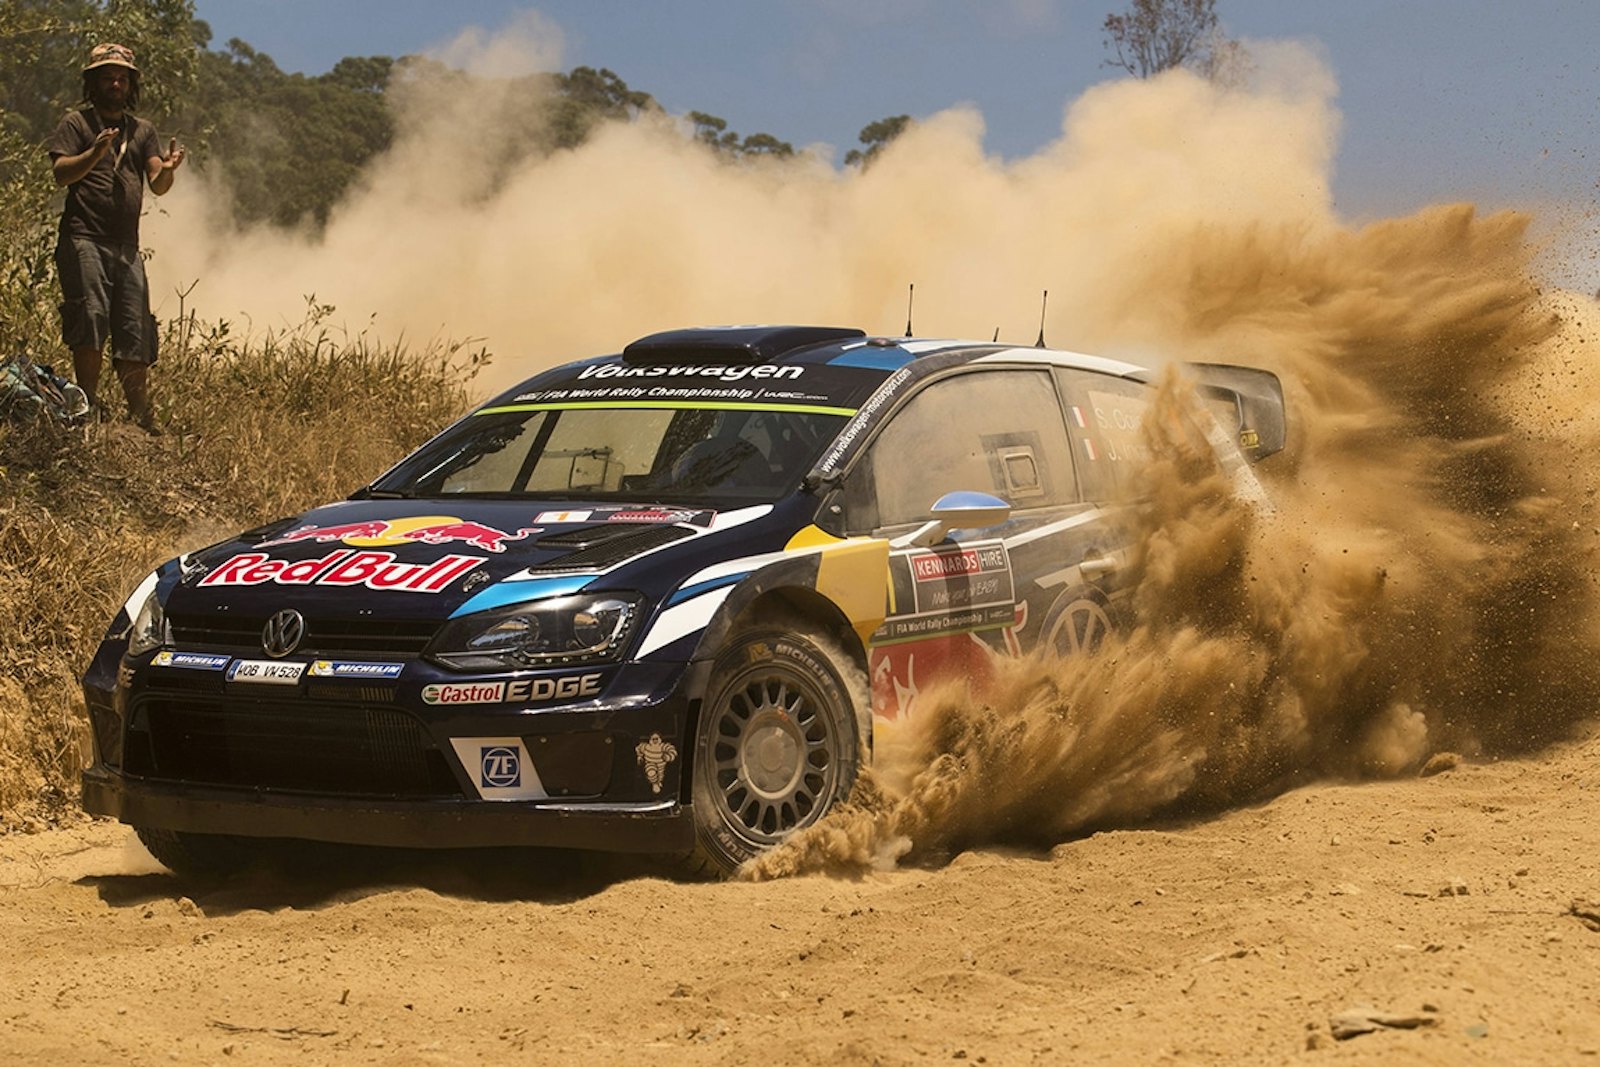 Sebastien Ogier (FRA) performs during the FIA World Rally Championship Australia 2016 in Coffs Harbour on November 19, 2016 // Jaanus Ree/Red Bull Content Pool // P-20161120-00482 // Usage for editorial use only // Please go to www.redbullcontentpool.com for further information. //